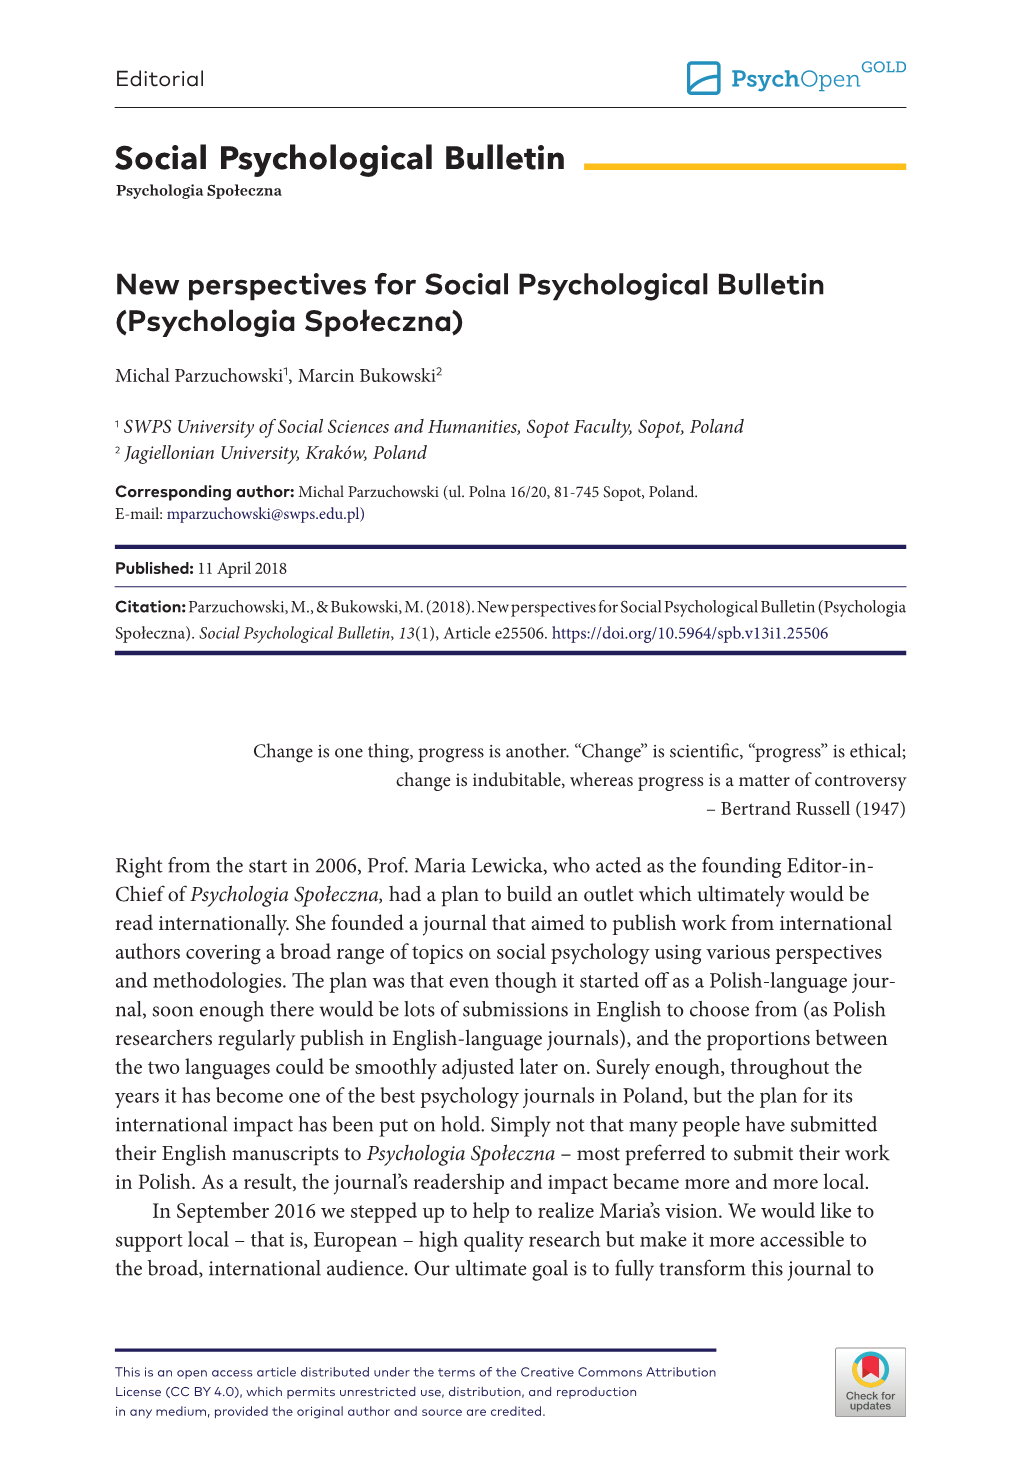 The Updated Foci for Social Psychological Bulletin